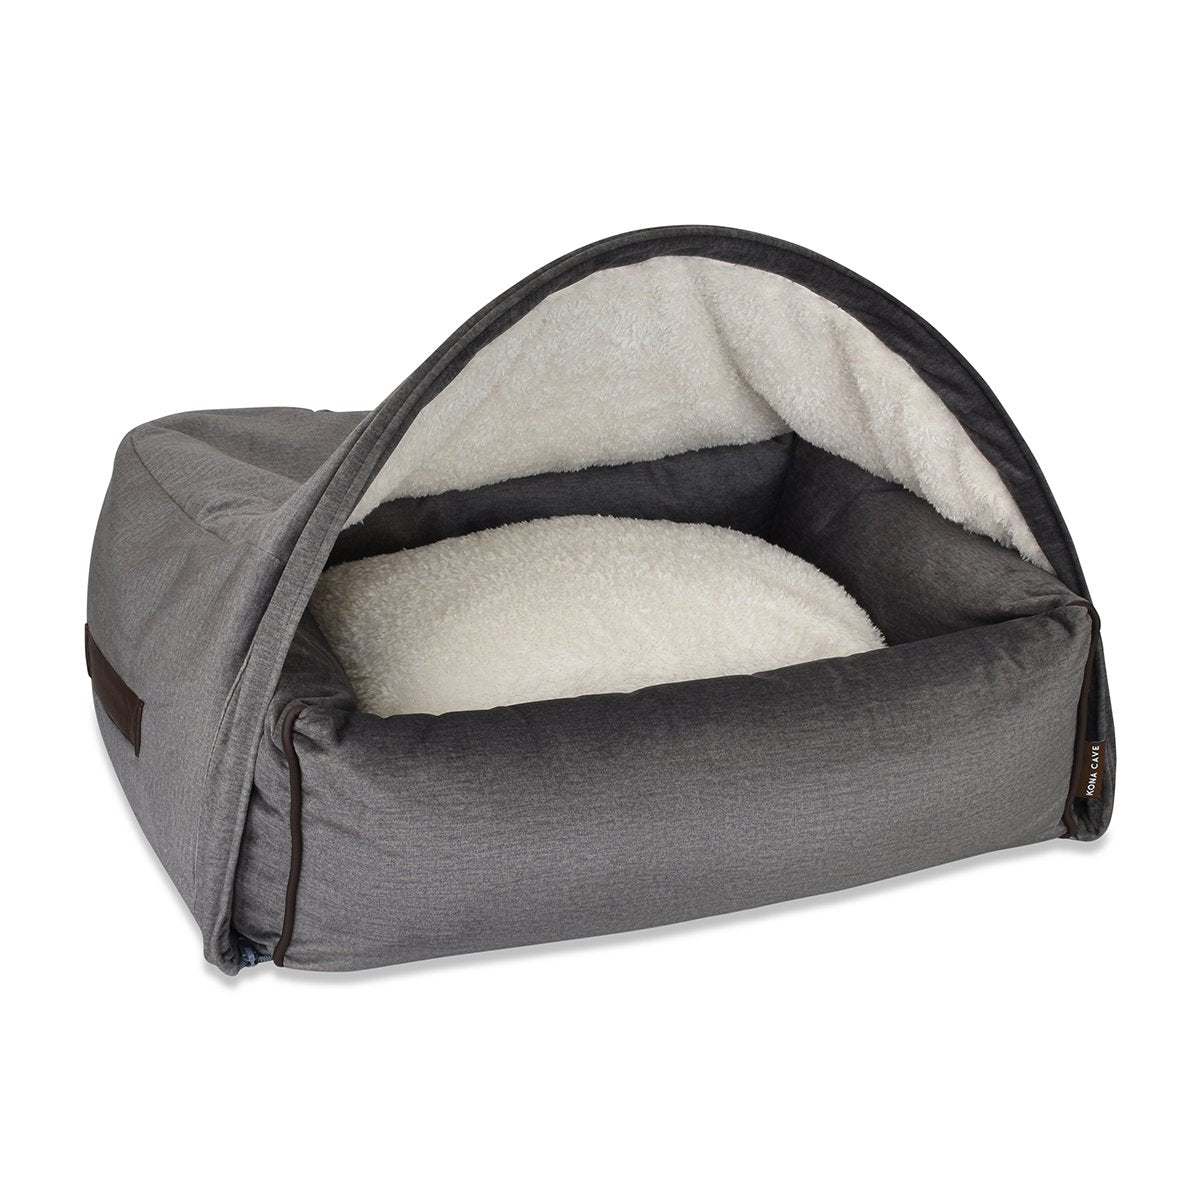 KONA CAVE® Luxury canopy cuddle cave den for burrowing dogs and cats in washable grey velvet with fluffy fleece lining. Beautiful and high-quality luxury cozy clam cave bed. 